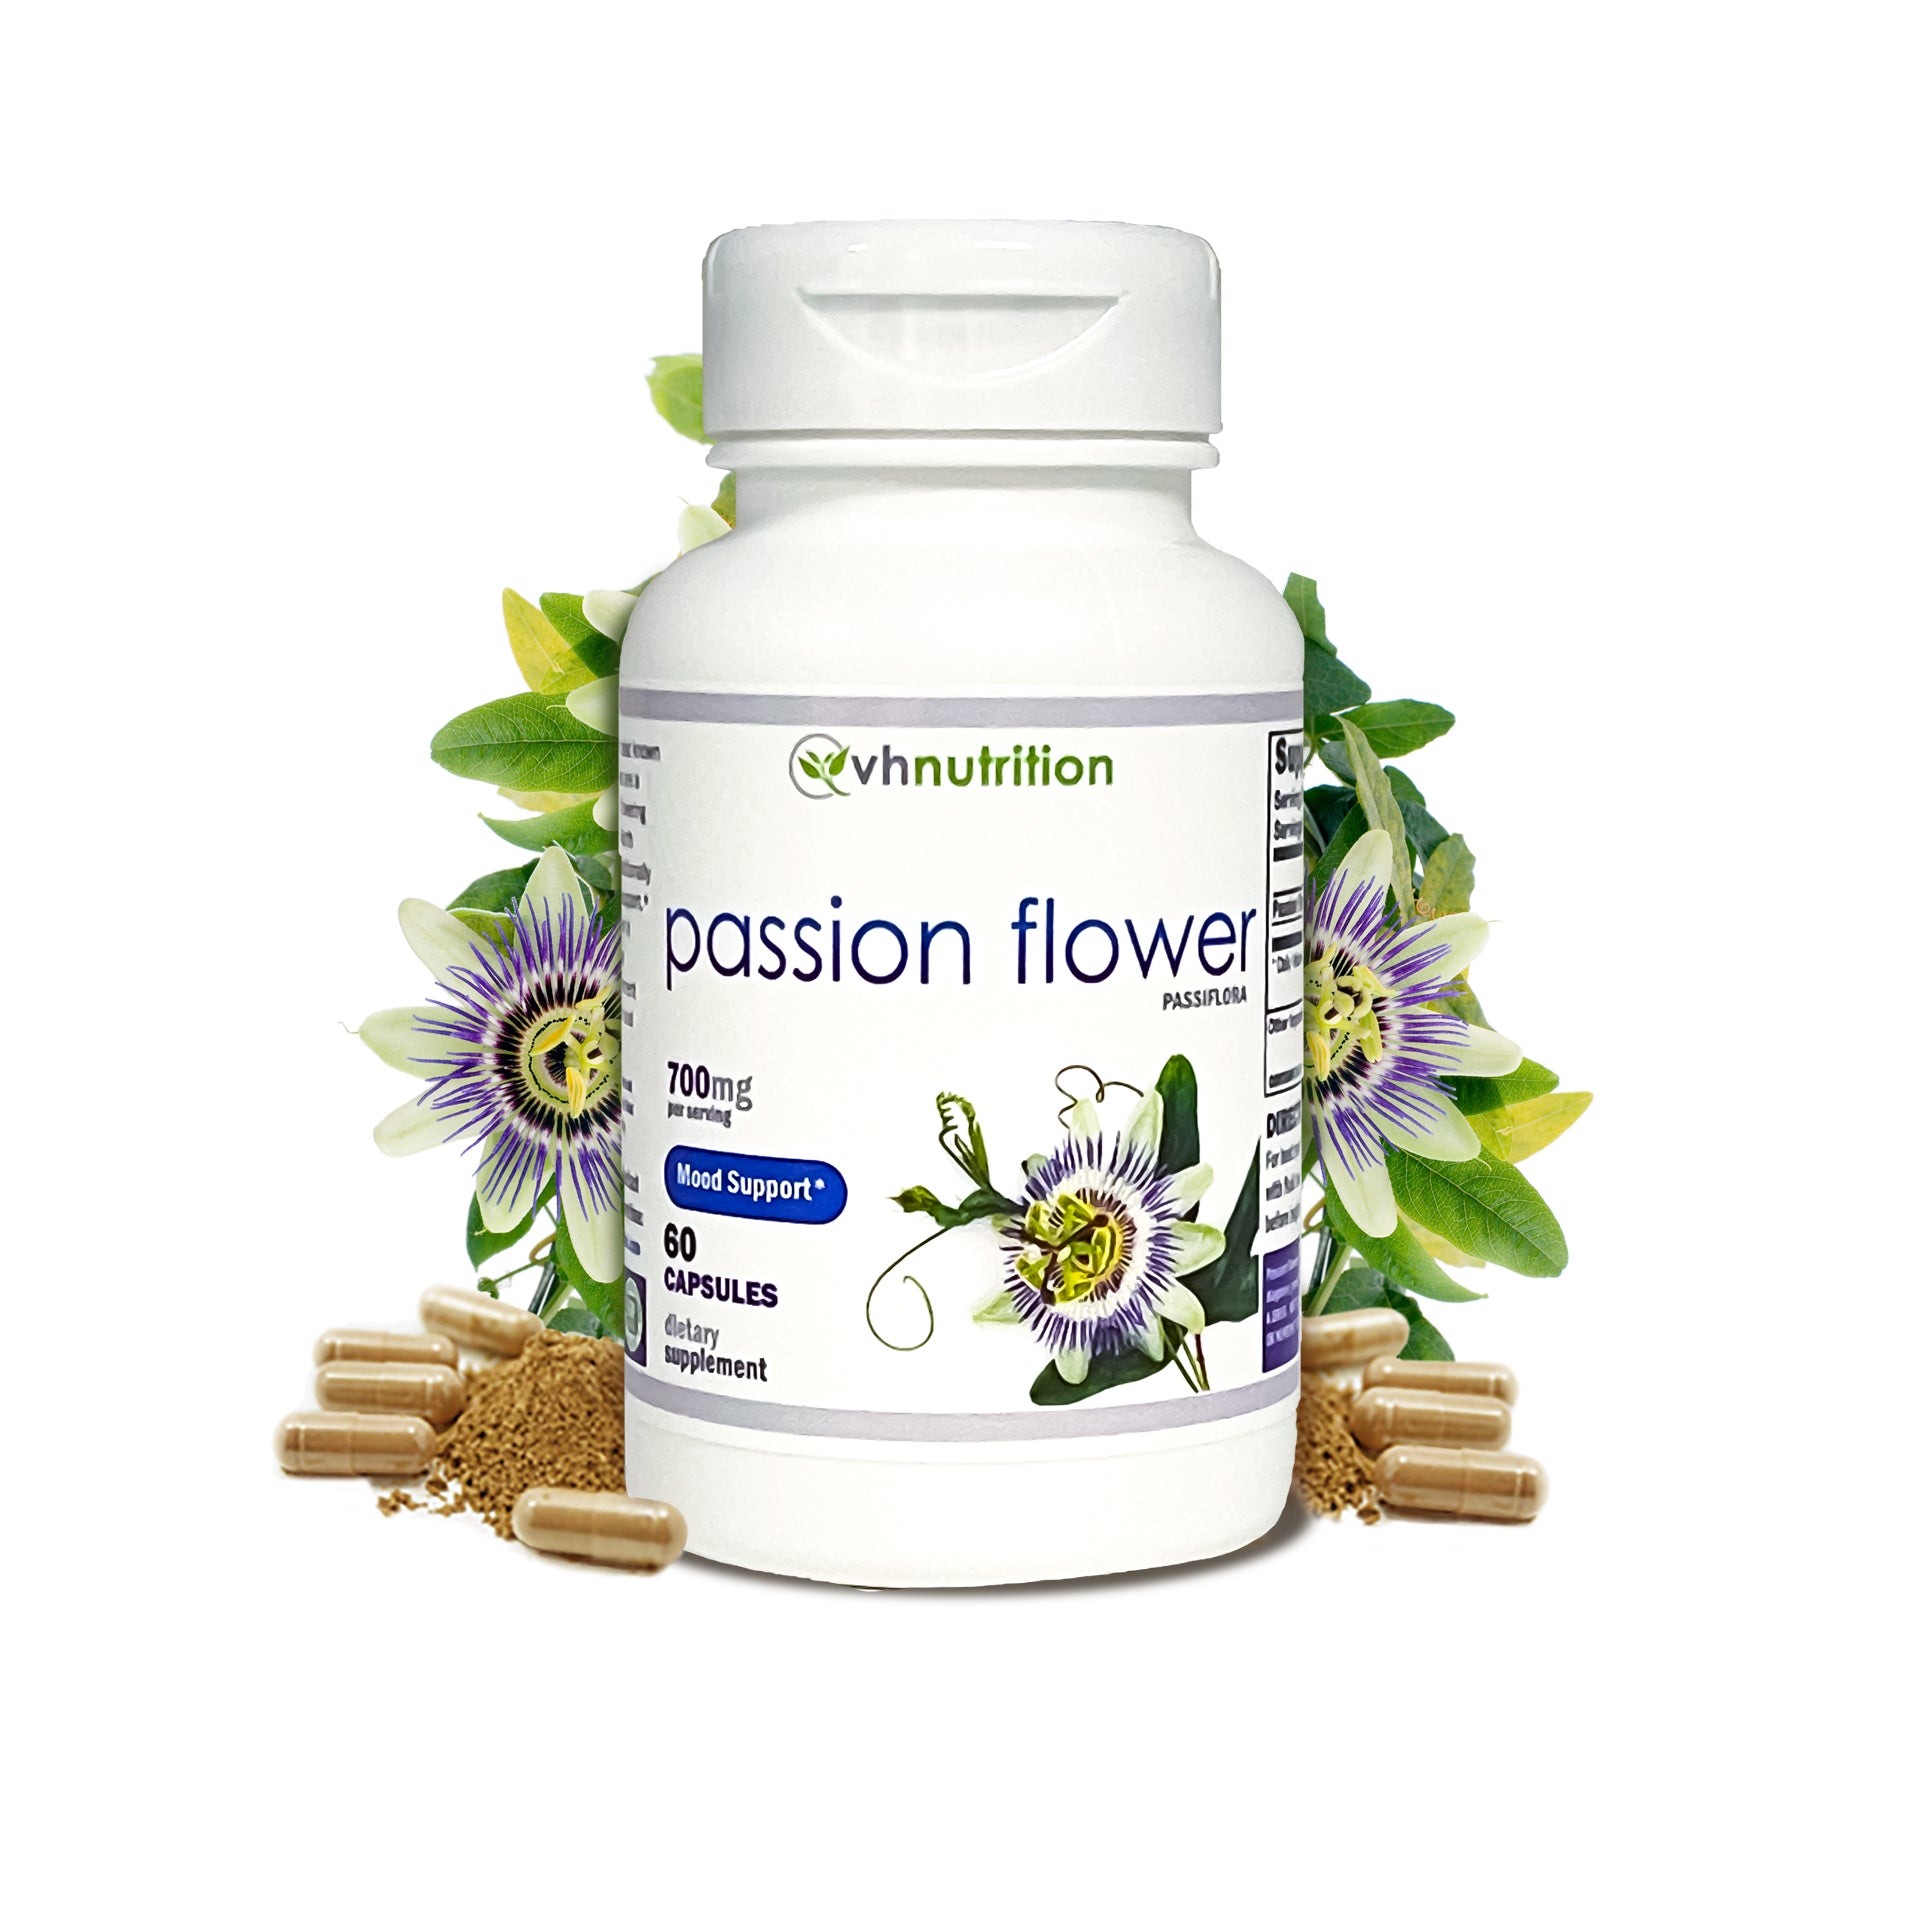 VH Nutrition RELAX STACK | Natural Stress & Mood Support* | Gotu Kola, Kava+, Passion Flower | 25% OFF our Regular Price